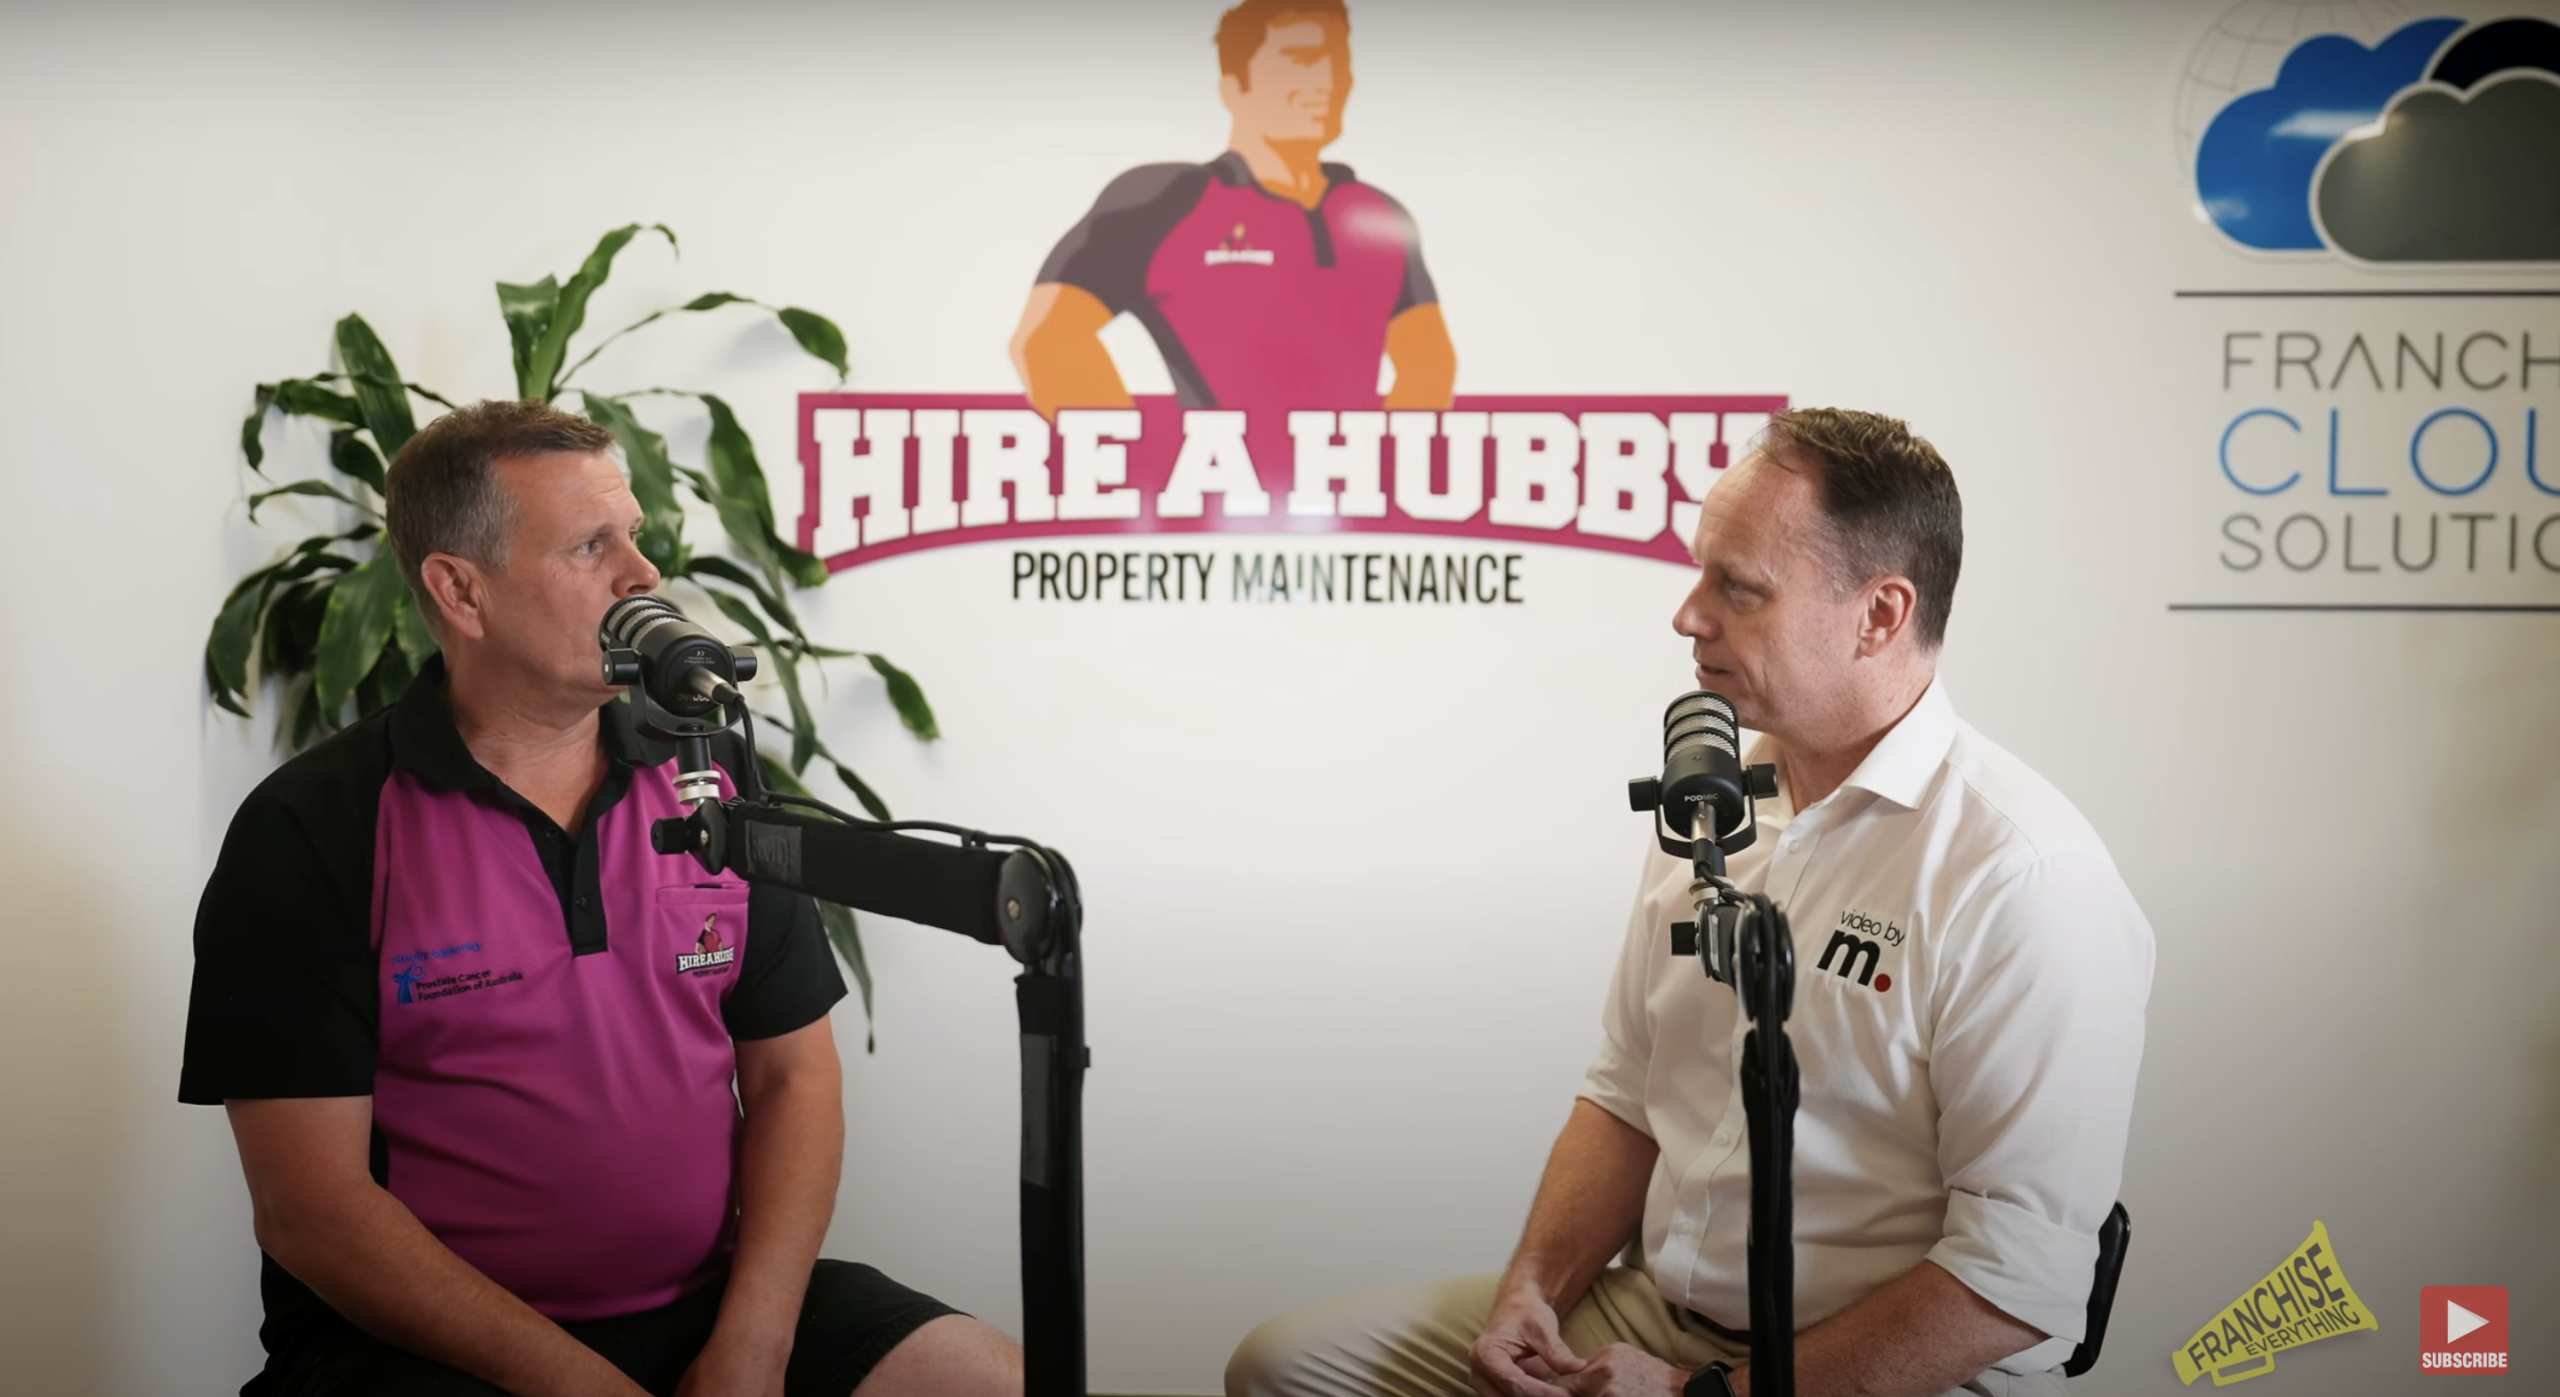 Rod Reece from Hire A Hubby Dee Why talks about his journey to becoming a business owner.